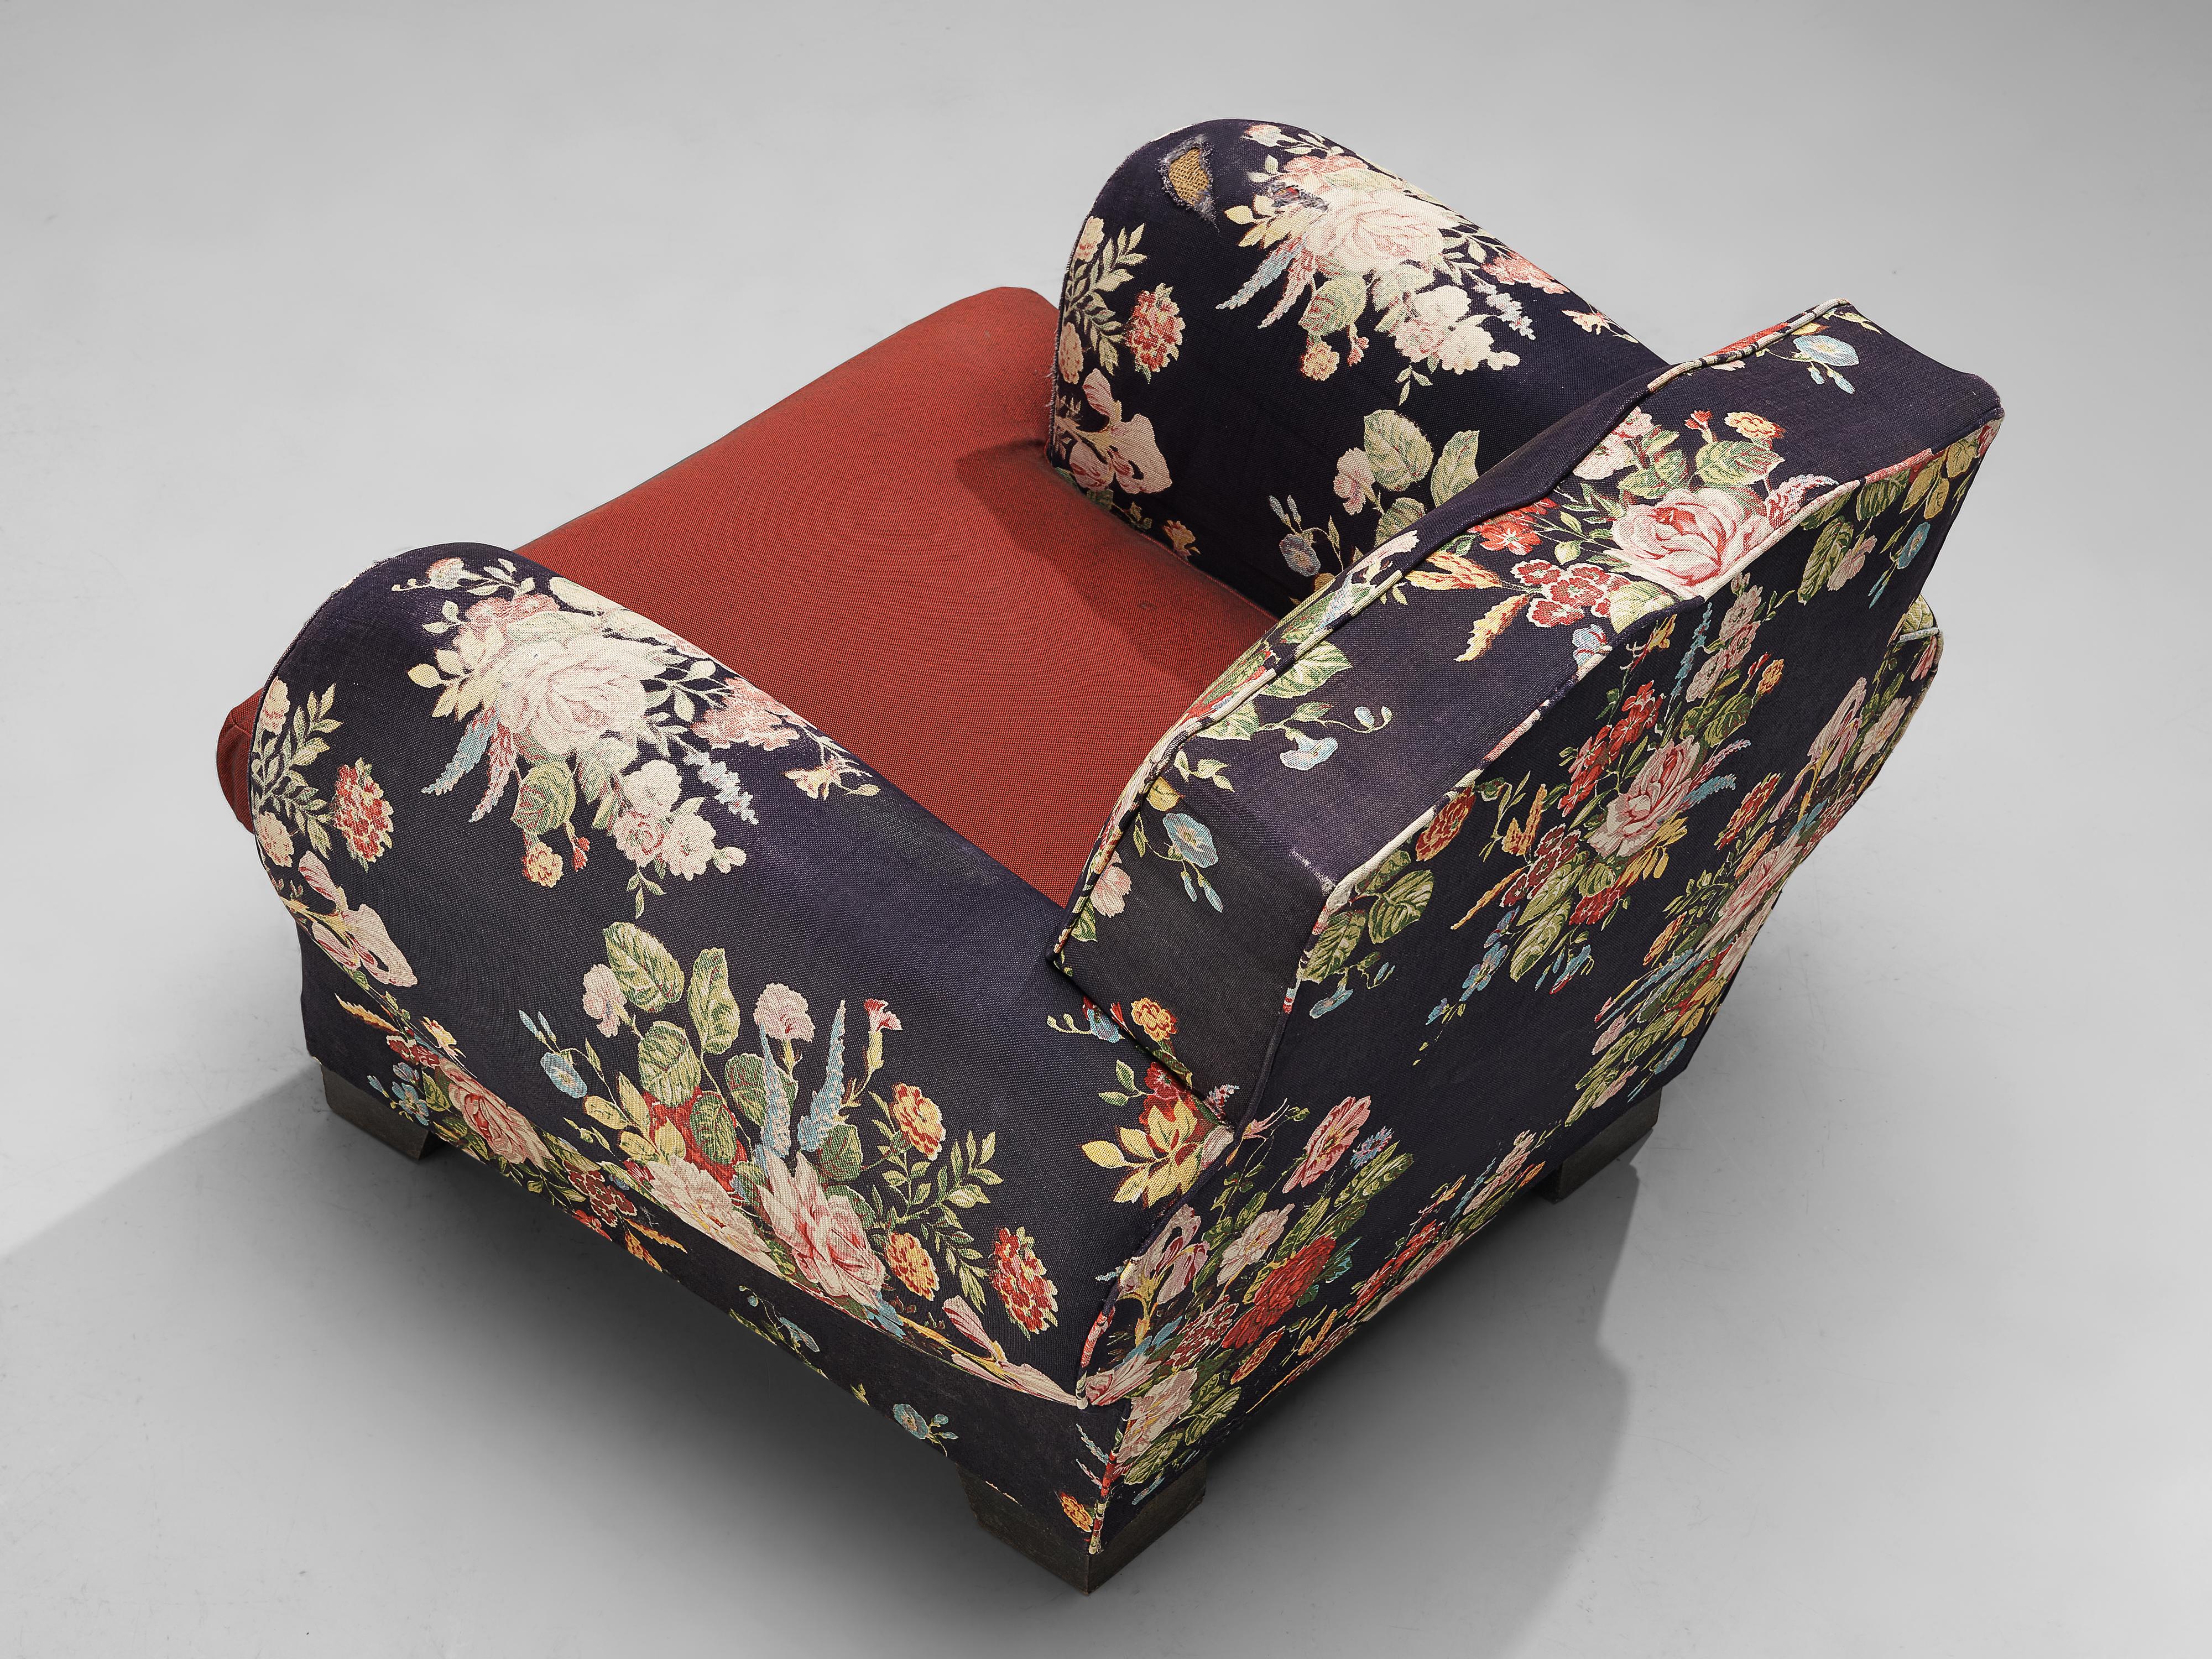 French Art Deco Pair of Lounge Chairs in Floral Upholstery 1